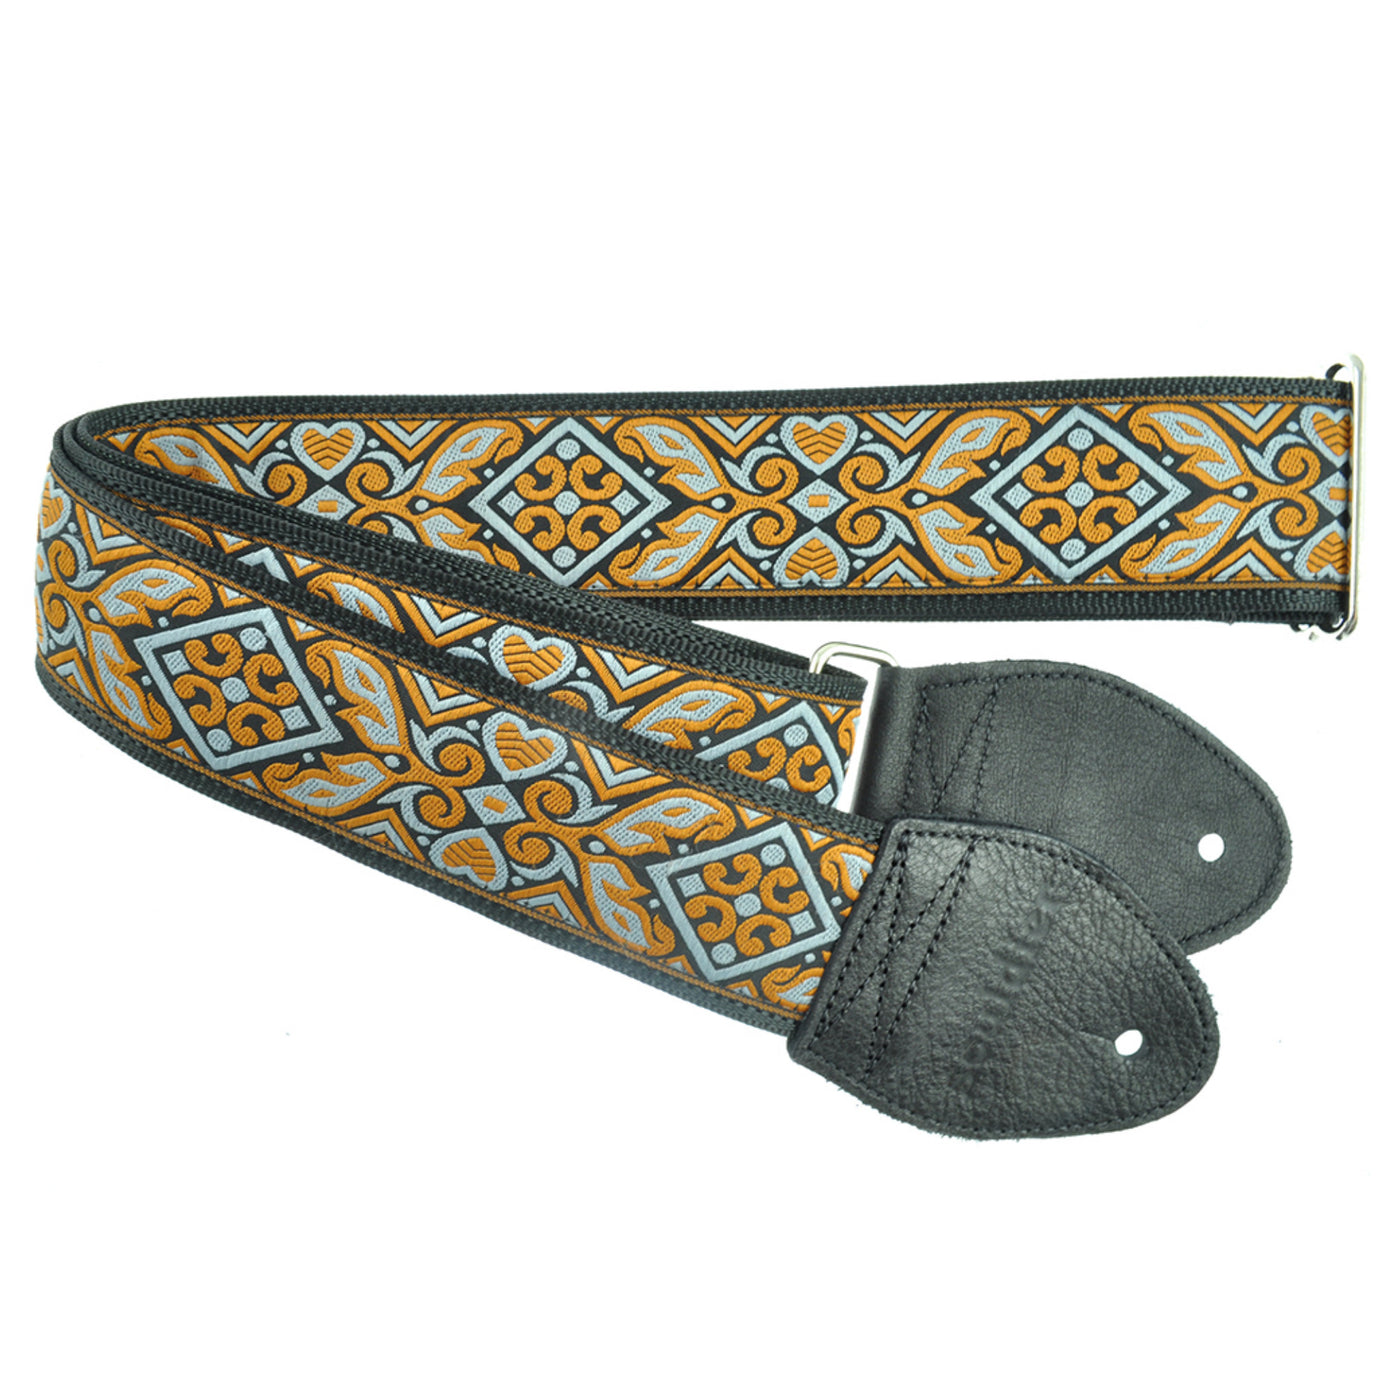 Souldier GS0090BK04BK - Handmade Seatbelt Guitar Strap for Bass, Electric or Acoustic Guitar, 2 Inches Wide and Adjustable Length from 30" to 63"  Made in the USA, Haida, Grey